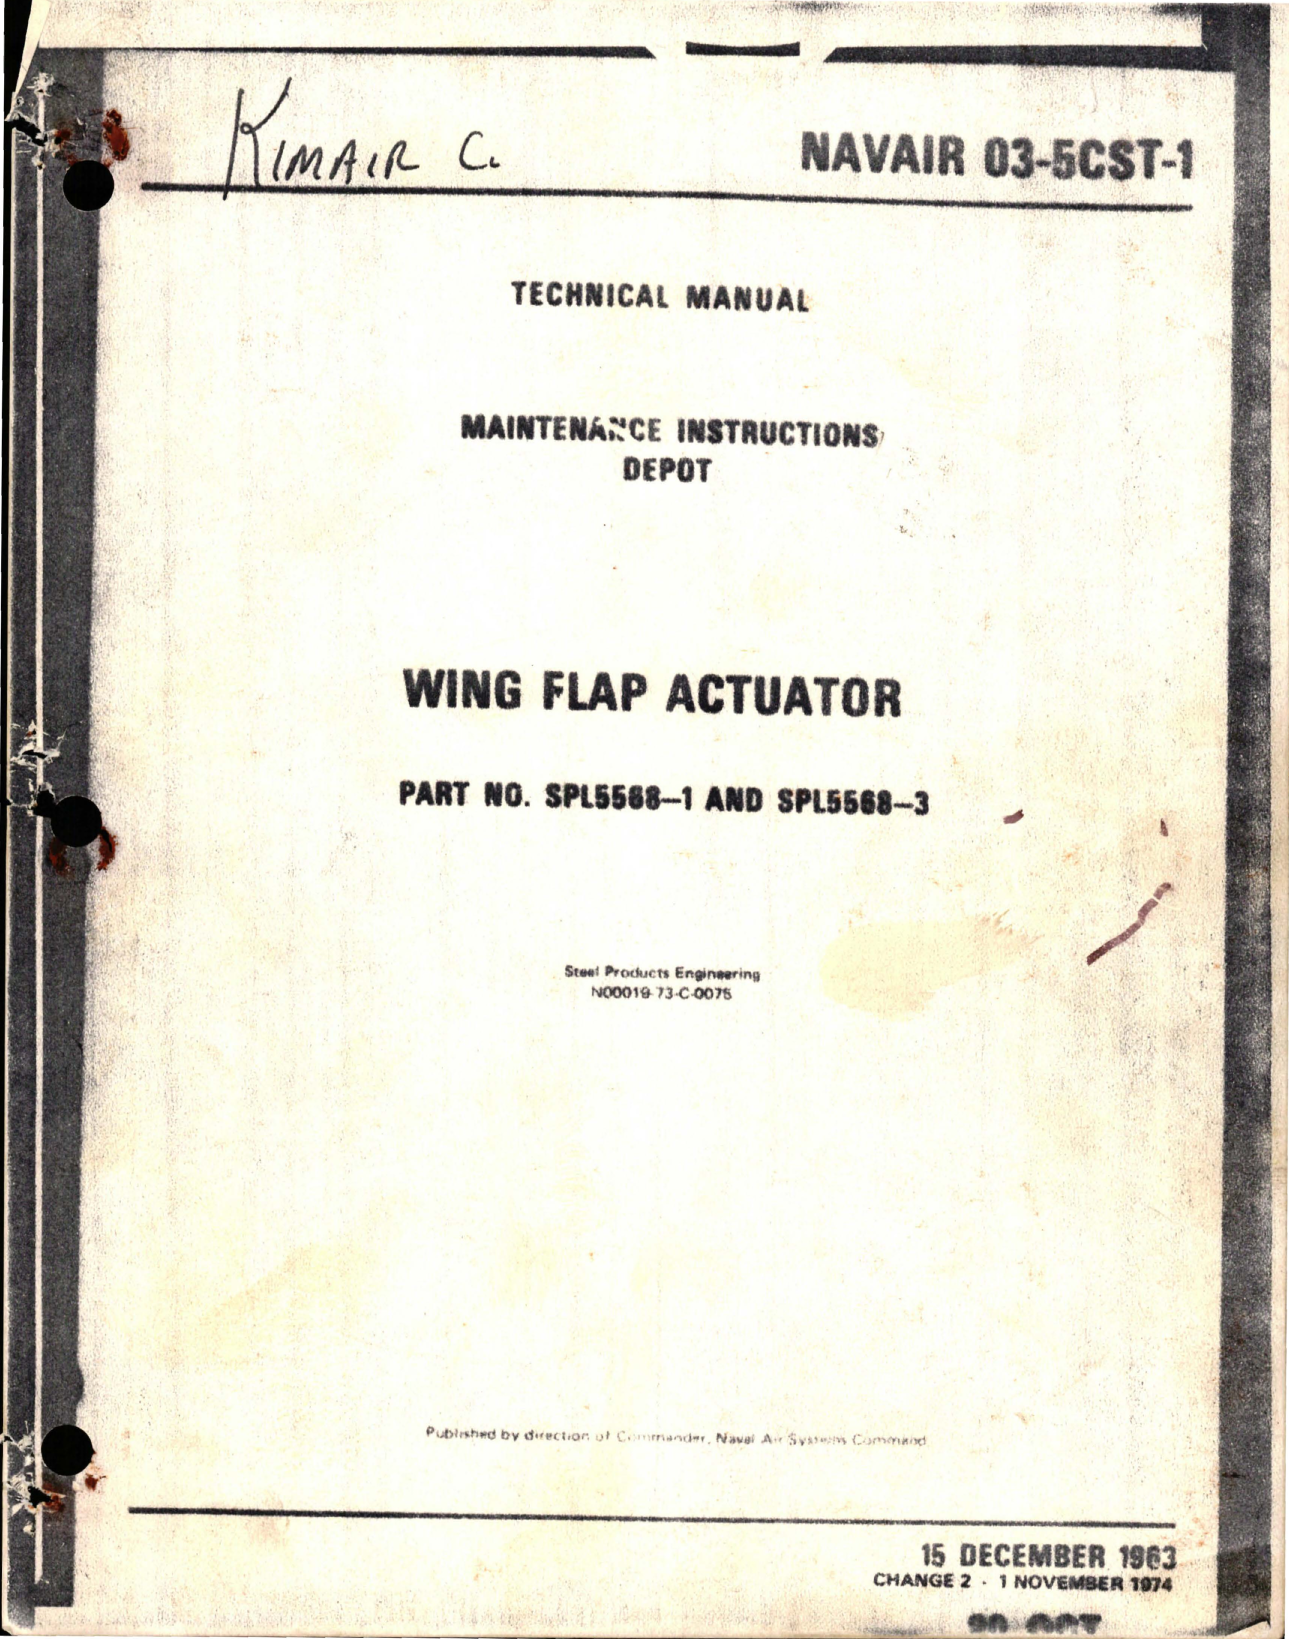 Sample page 1 from AirCorps Library document: Maintenance Instructions for Wing Flap Actuator - Parts SPL5588-1 and SPL5568-3 